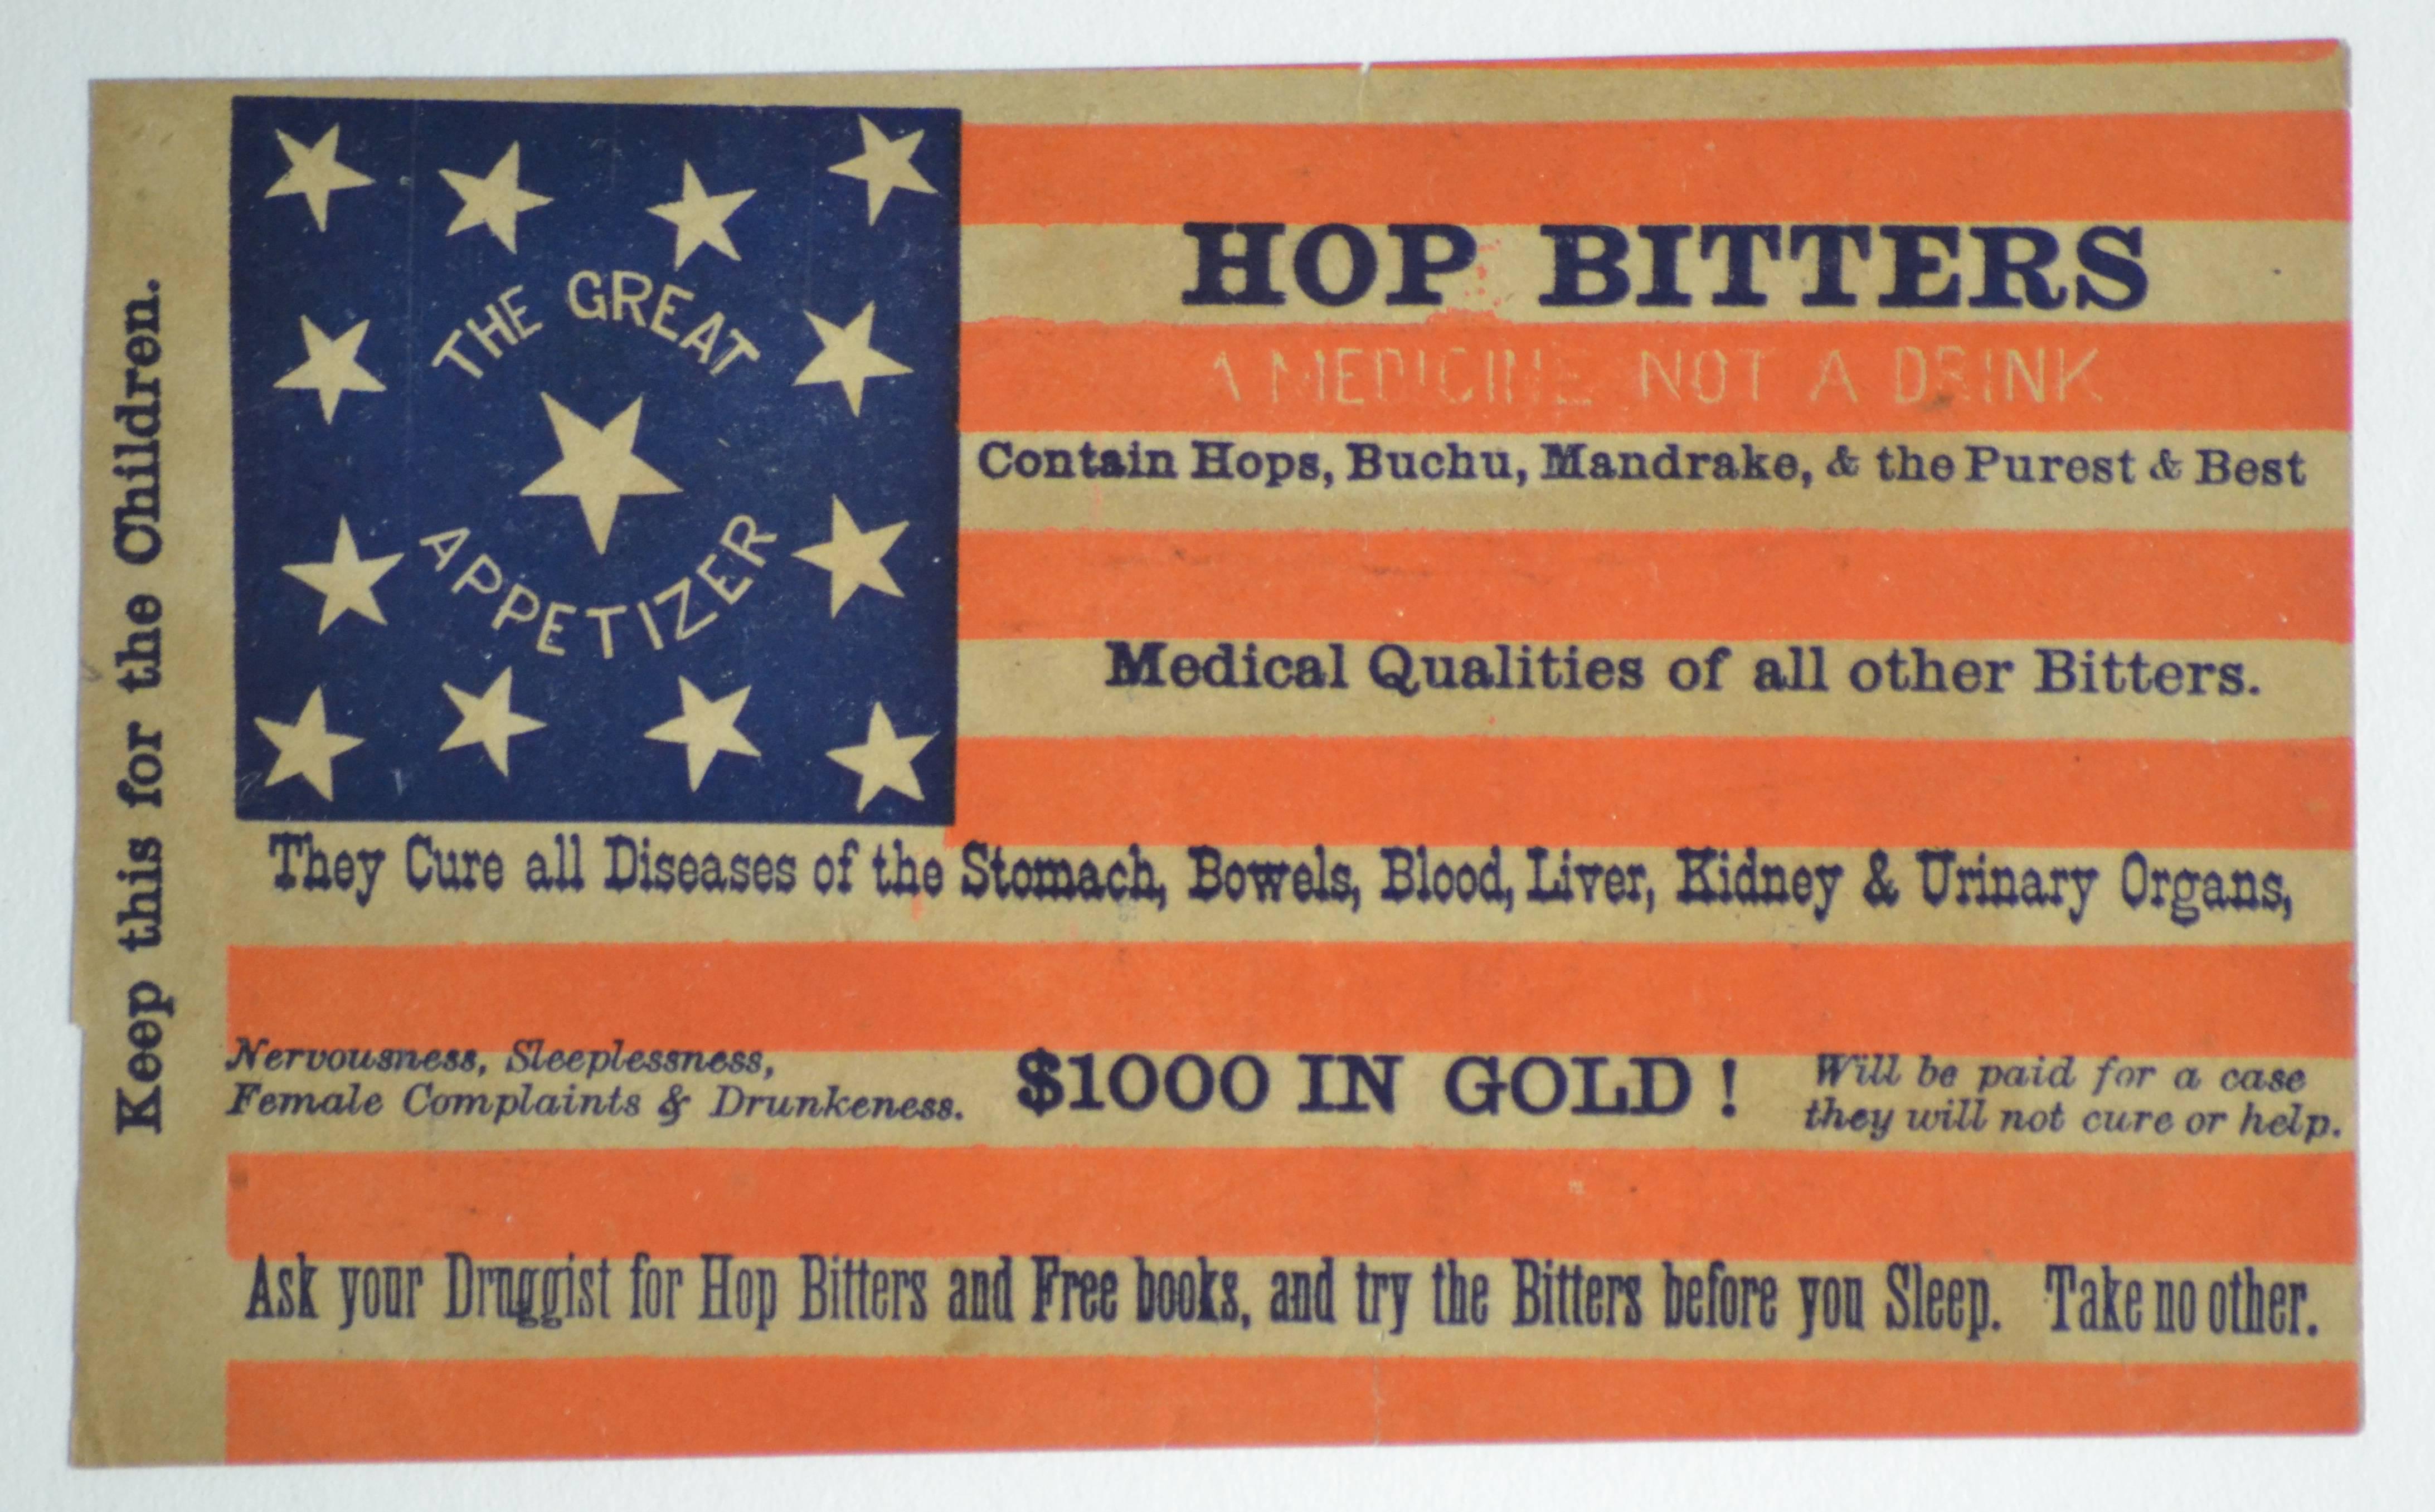 American Antique 13 Star Hop Bitters Advertising Card For Sale